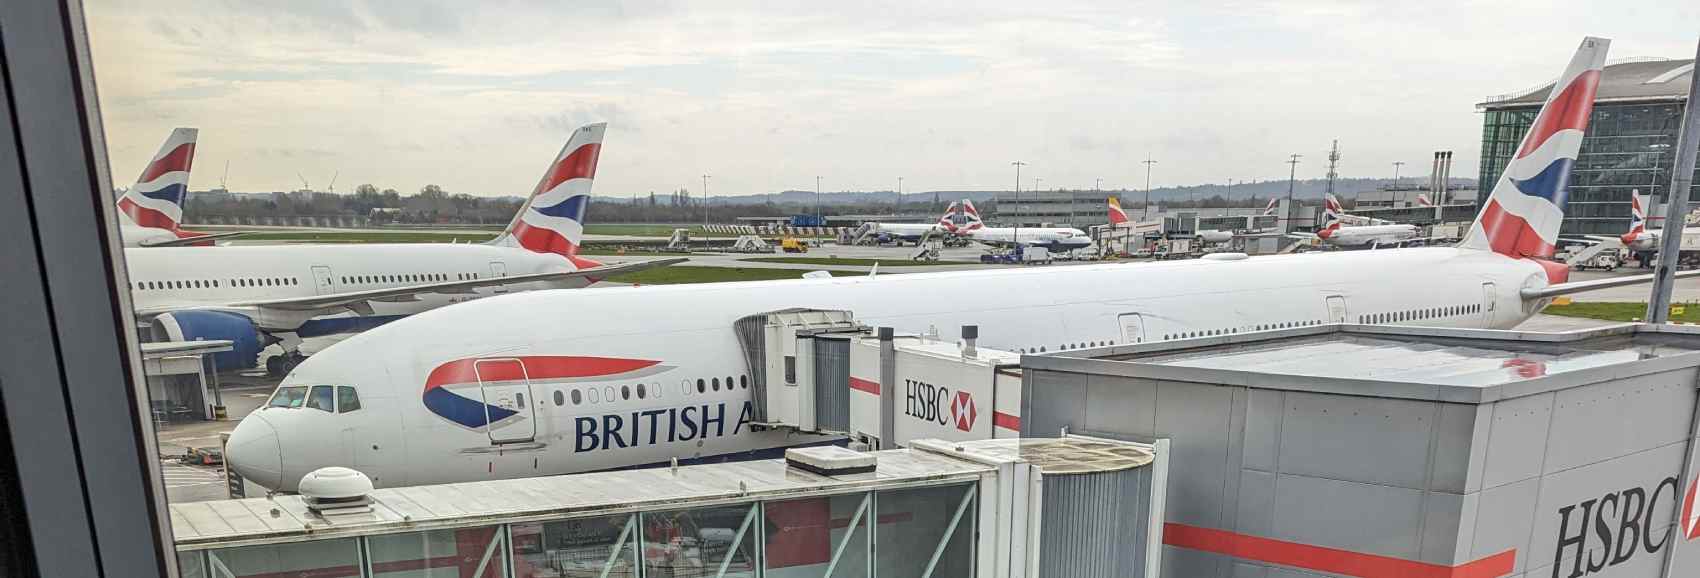 A view of a line of BA planes out of a window from the terminal